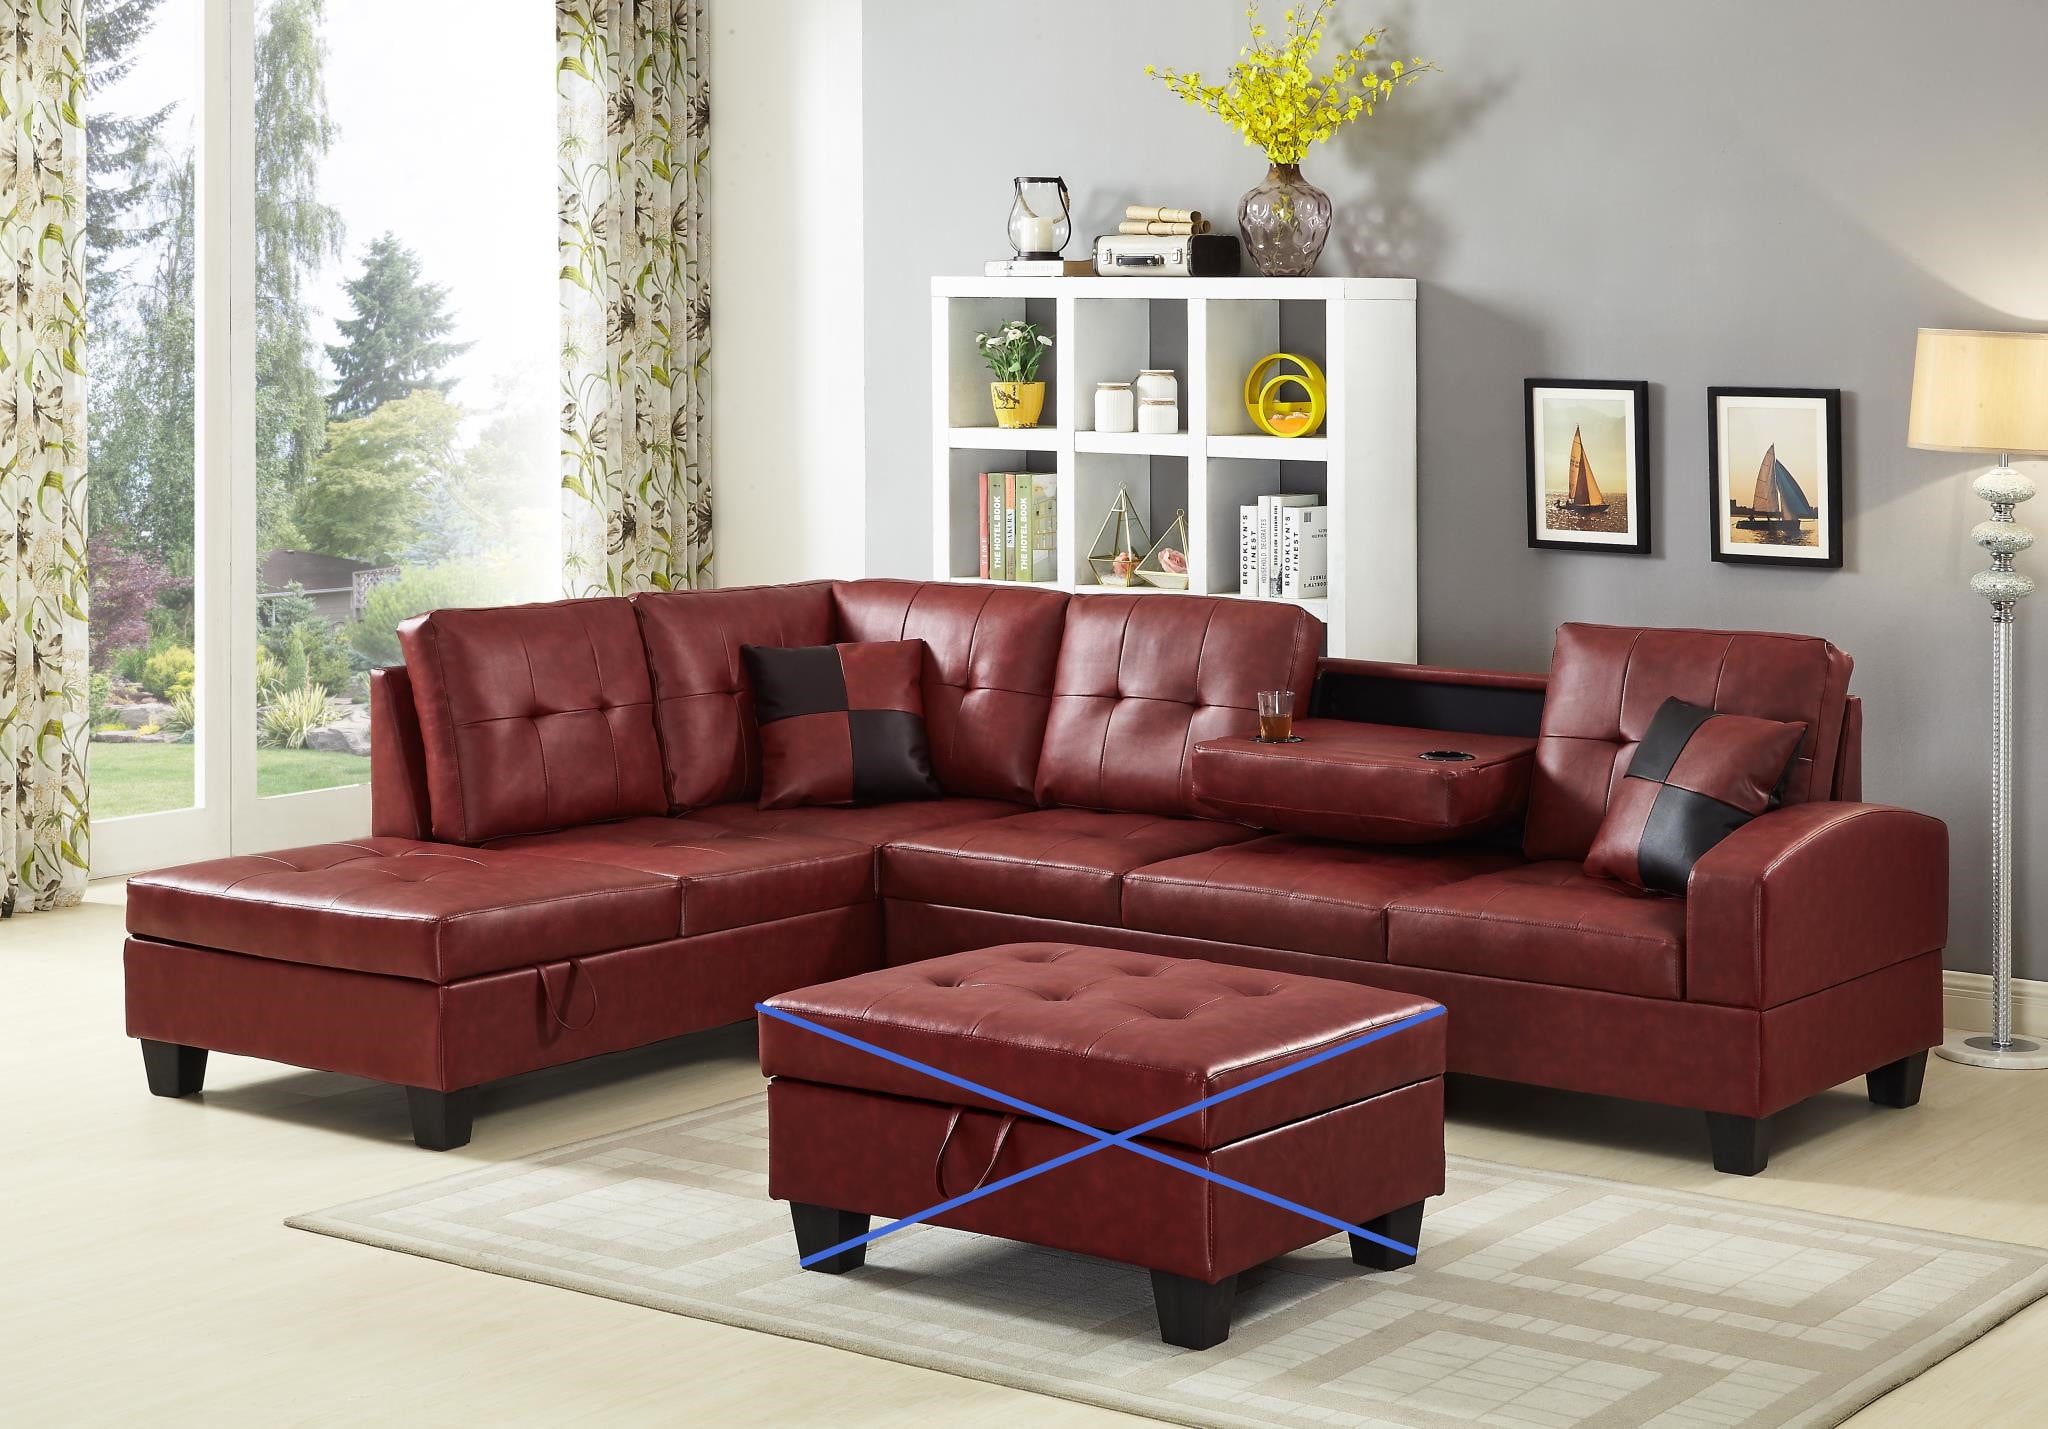 Star Home Living Red Faux Leather 3 Seater Left Facing Chaise Sectional Regarding Faux Leather Sectional Sofa Sets (Gallery 20 of 21)